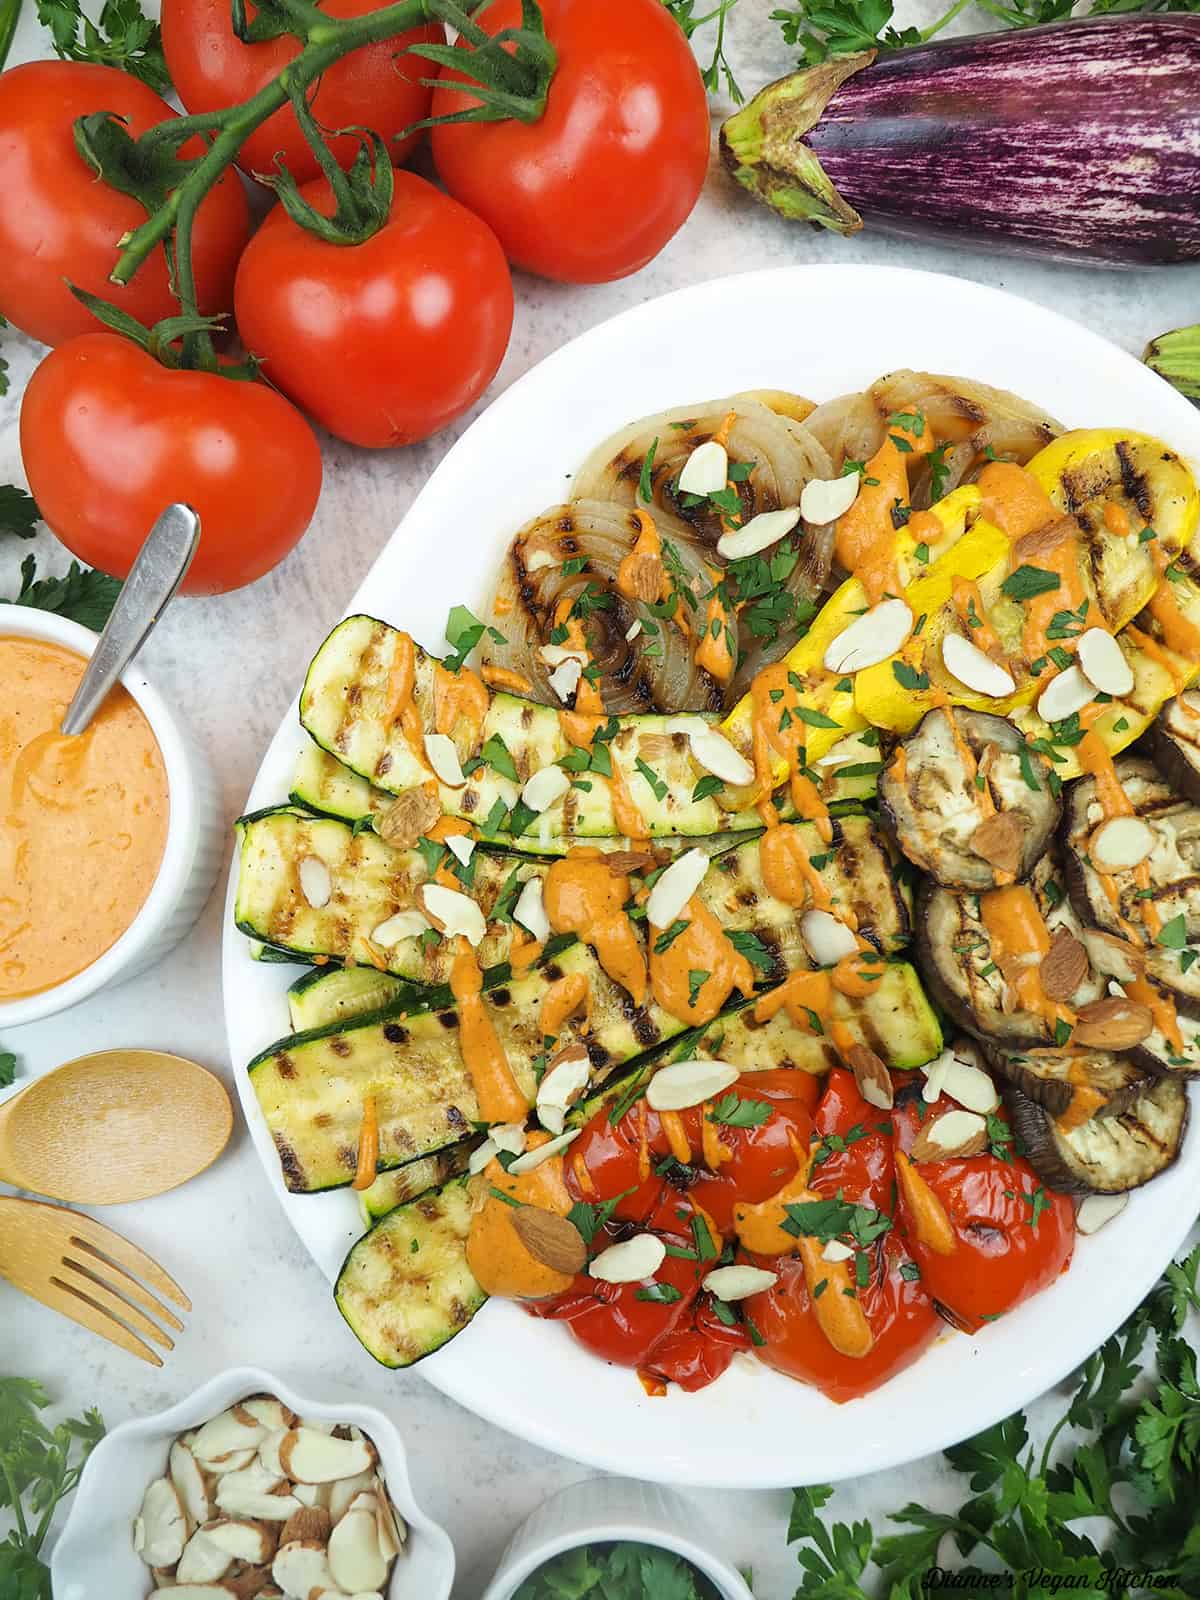 platter of grilled vegetables with tomatoes, eggplant, romesco, and almonds